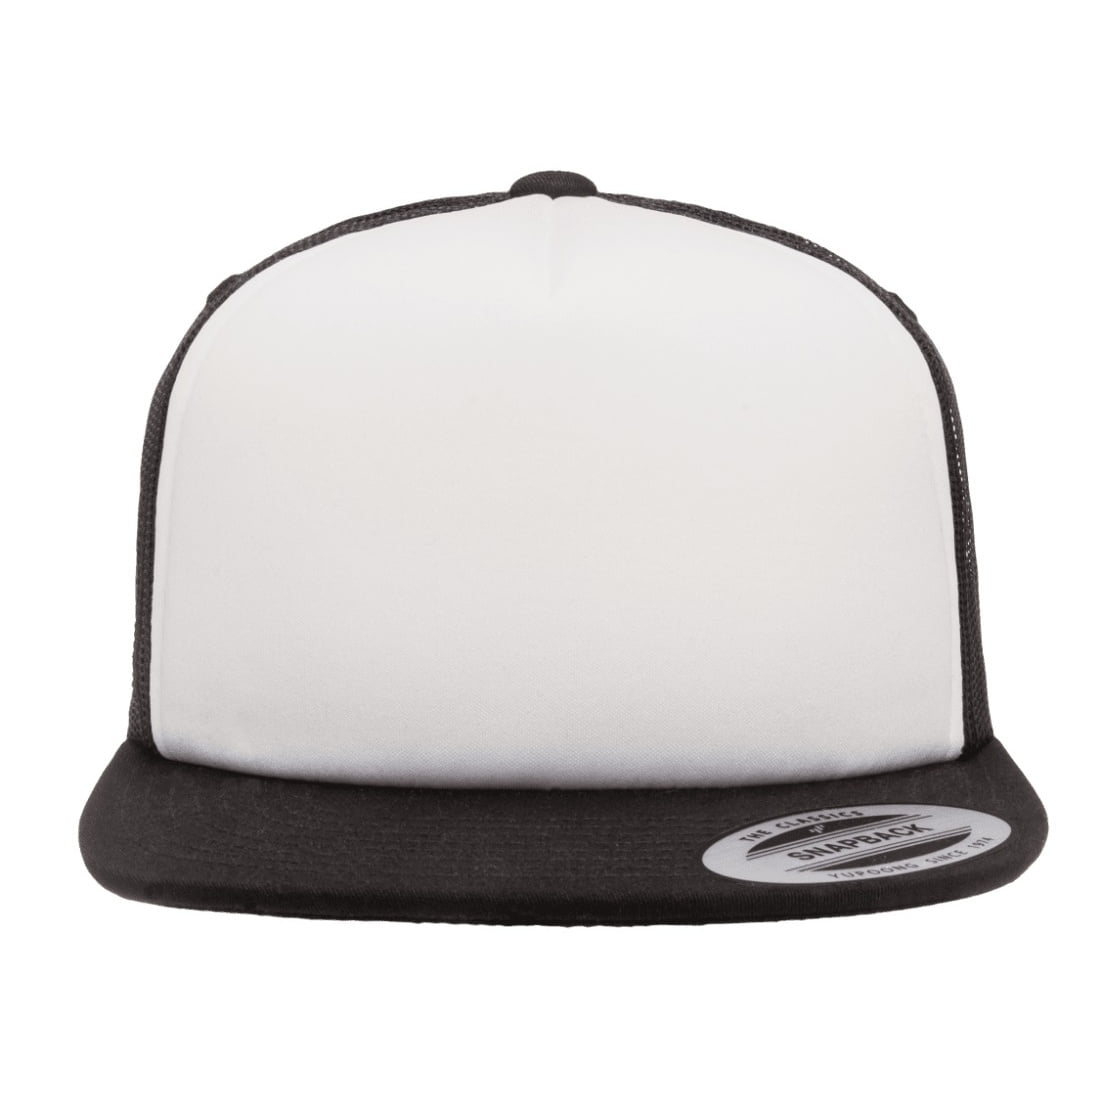 Flexfit By Yupoong Foam Trucker Cap With White Front